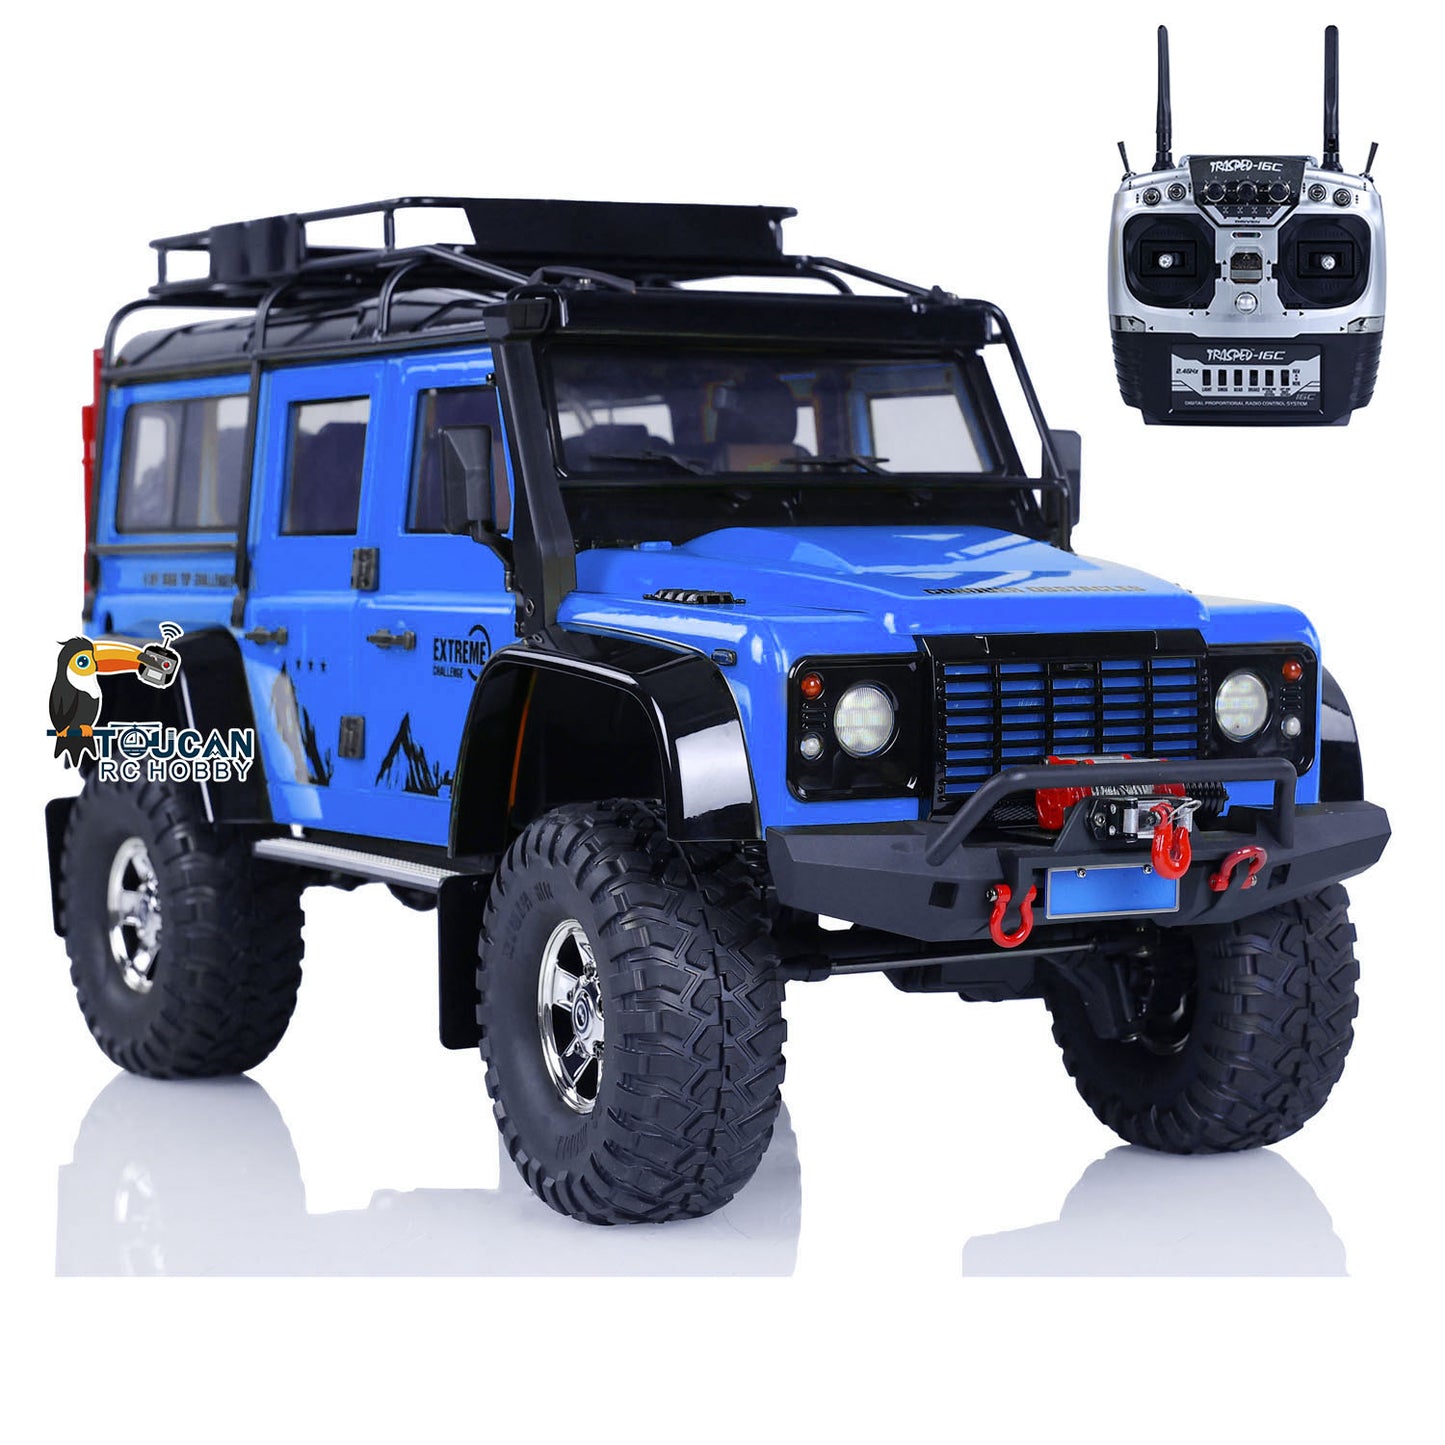 HG 1/10 RC Crawler Car 4x4 Off-road Vehicle P411 Lights Sound Radio System Smoking Motor Outdoor Remote Control Vehicle for